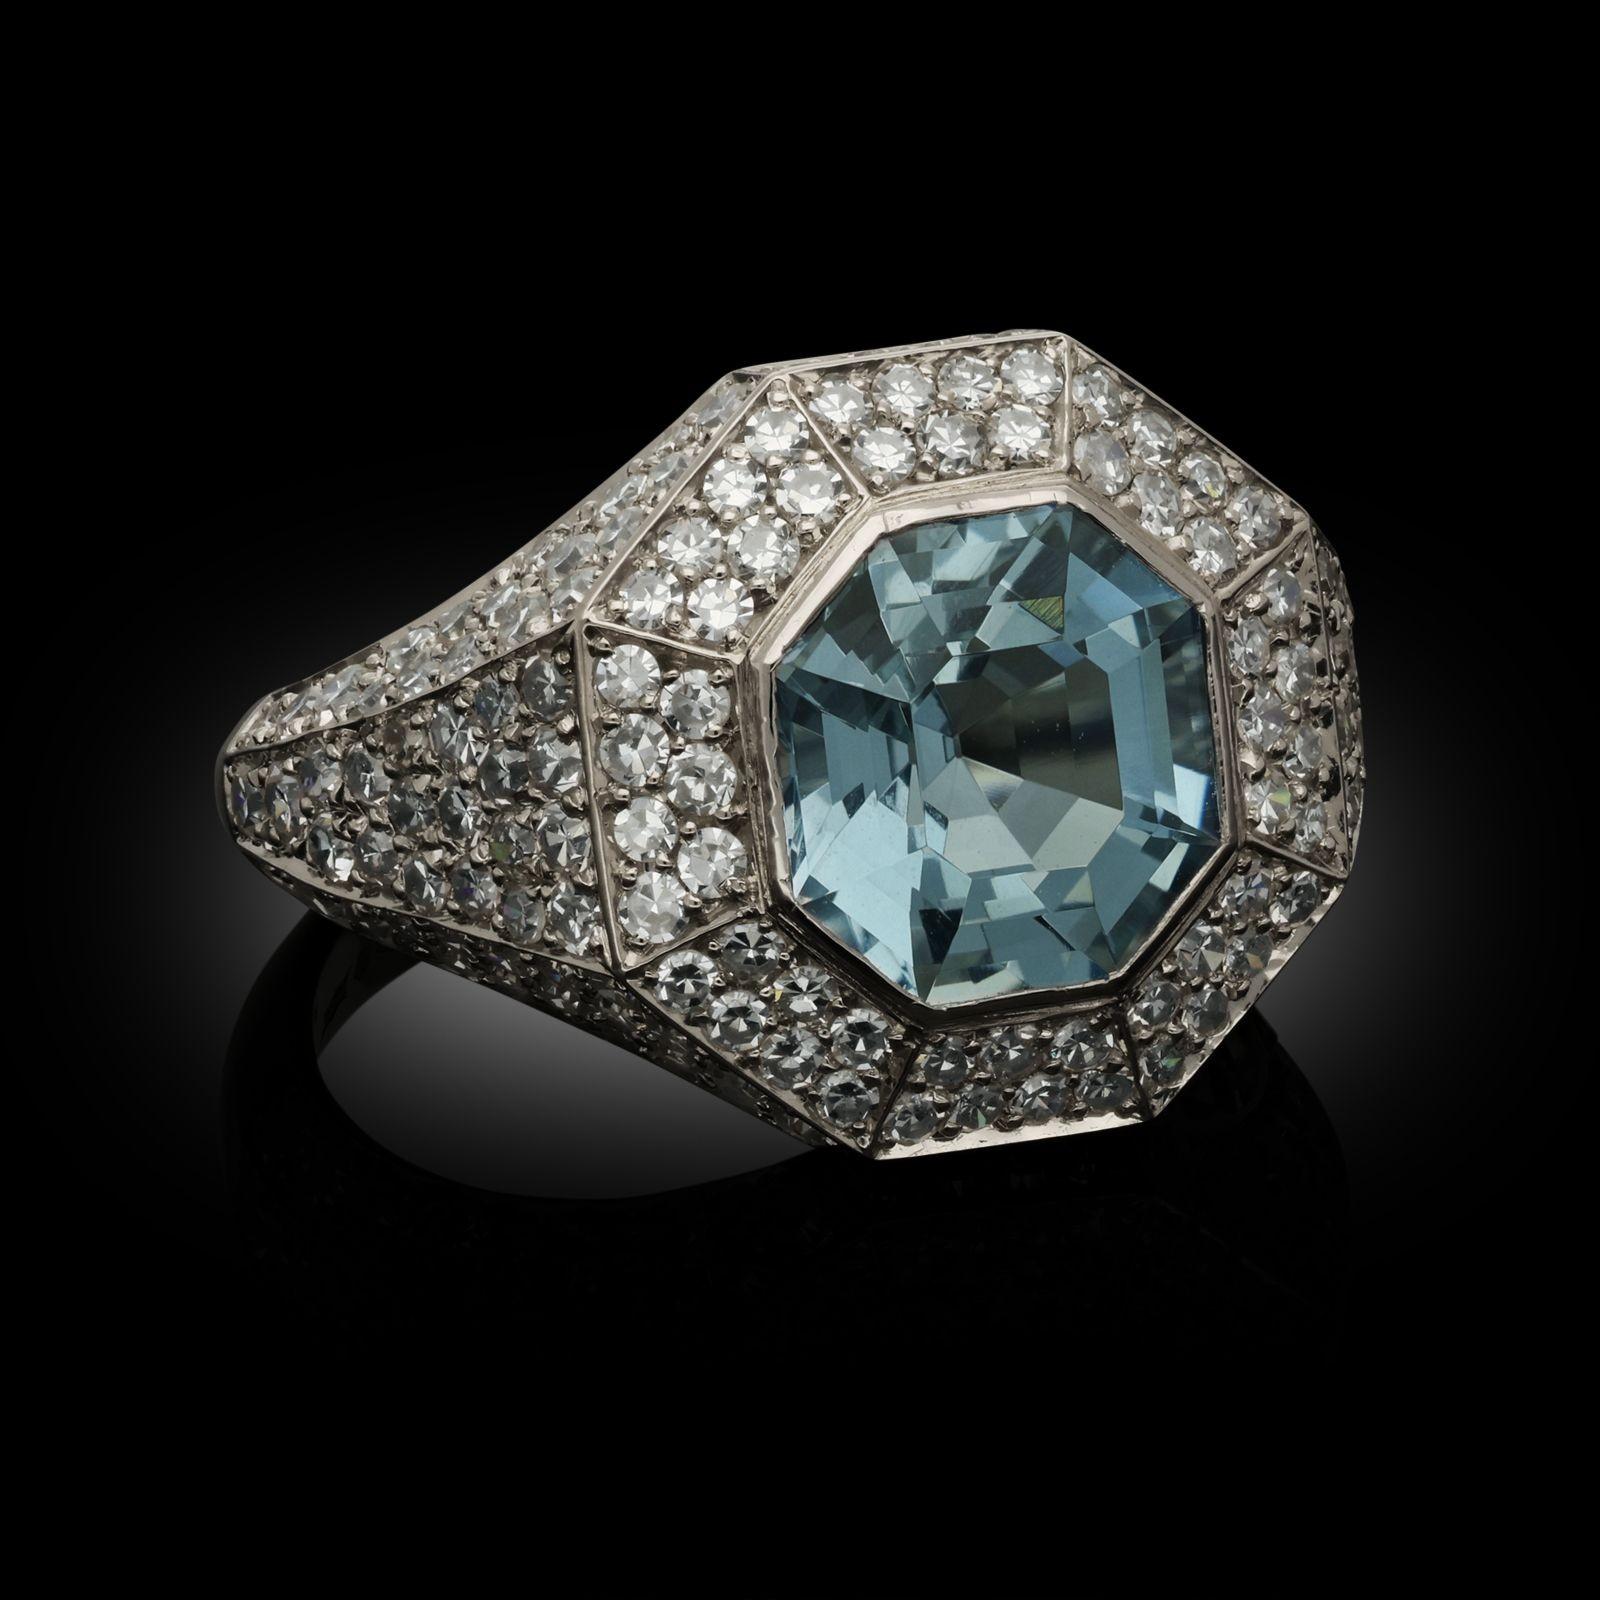 A beautiful geometric aquamarine and diamond ring by Hancocks, centred with an octagonal step-cut aquamarine weighing 2.02cts in rubover setting surrounded by a double row of single cut diamonds in an angled halo frame, all in a hand crafted